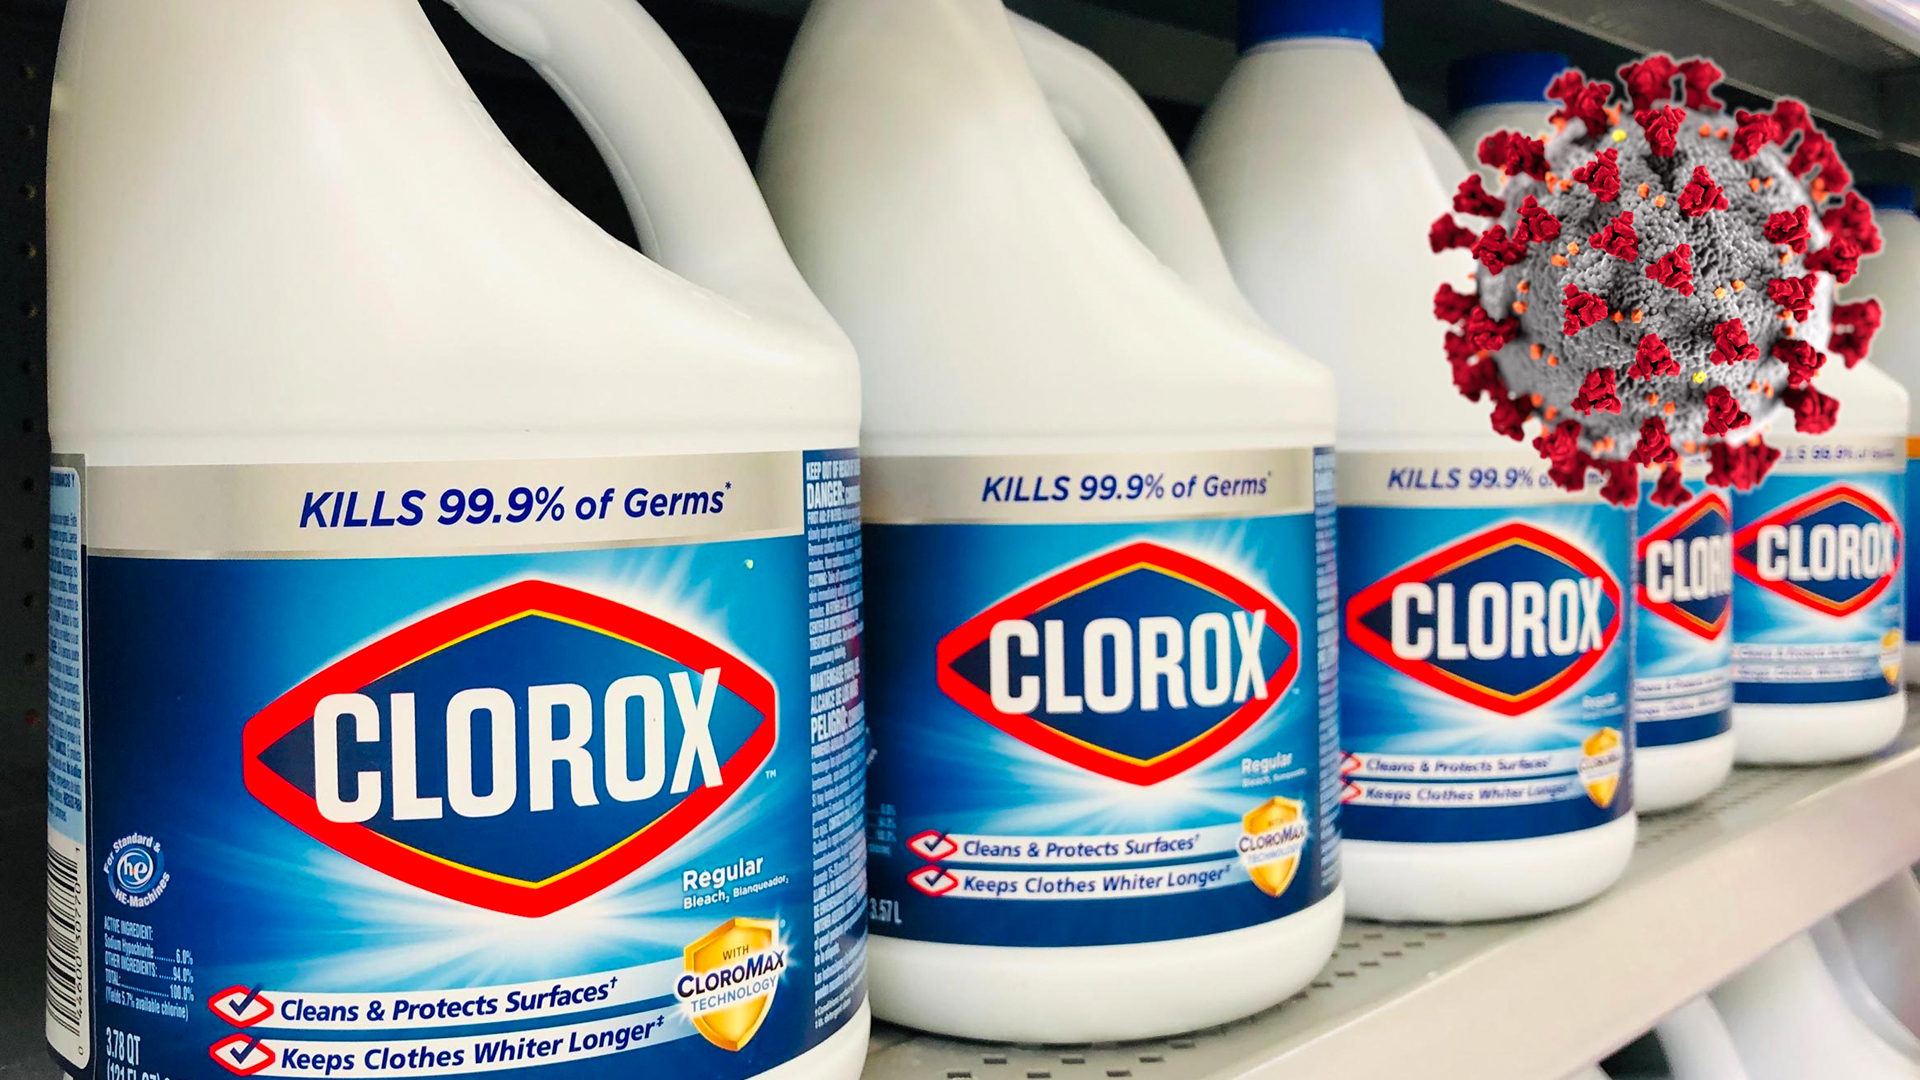 Family in US accused of selling bleach as COVID-19 cure